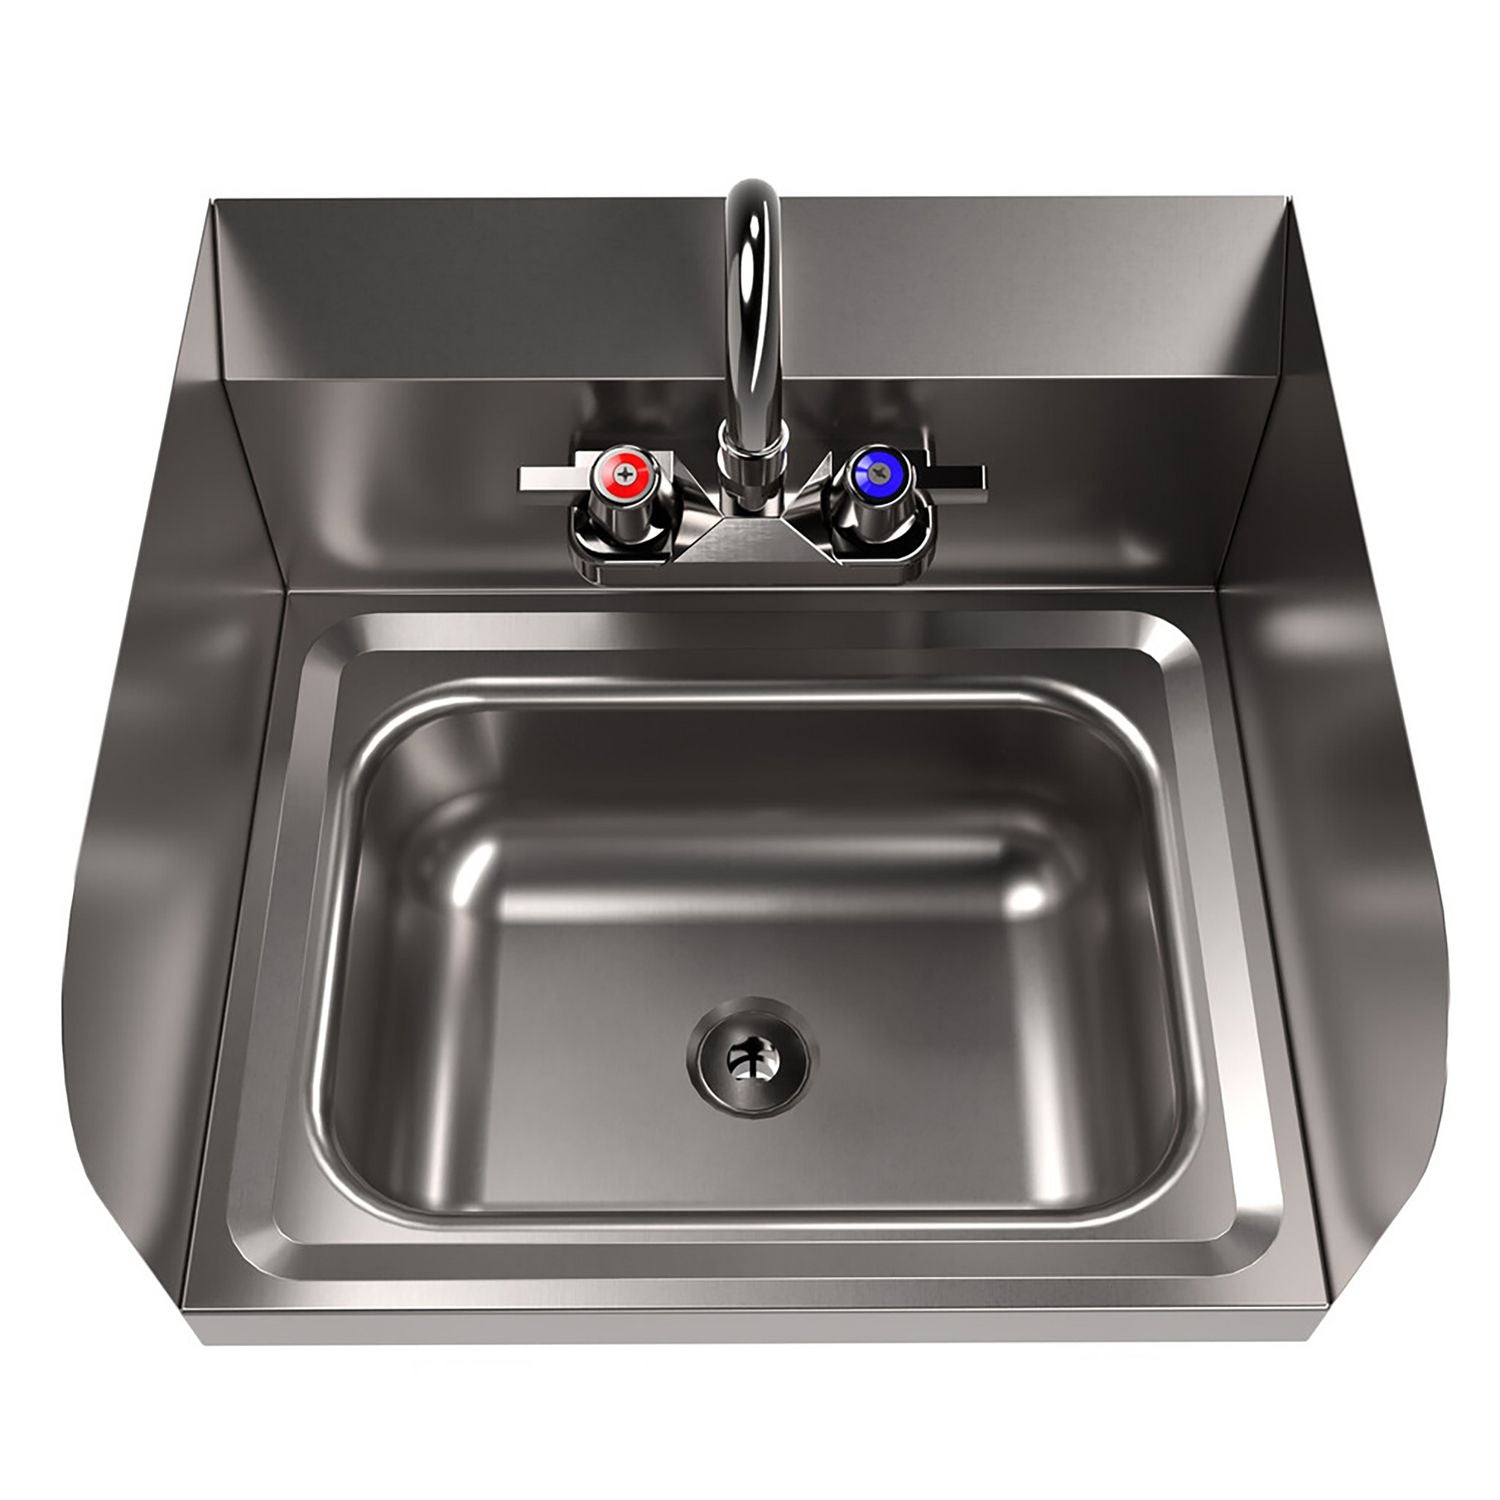 stainless-steel-hand-sink-with-side-splashes-and-faucet-14-l-x-10-w-x-5-h-ships-in-4-6-business-days_bkehsw1410ssp - 3